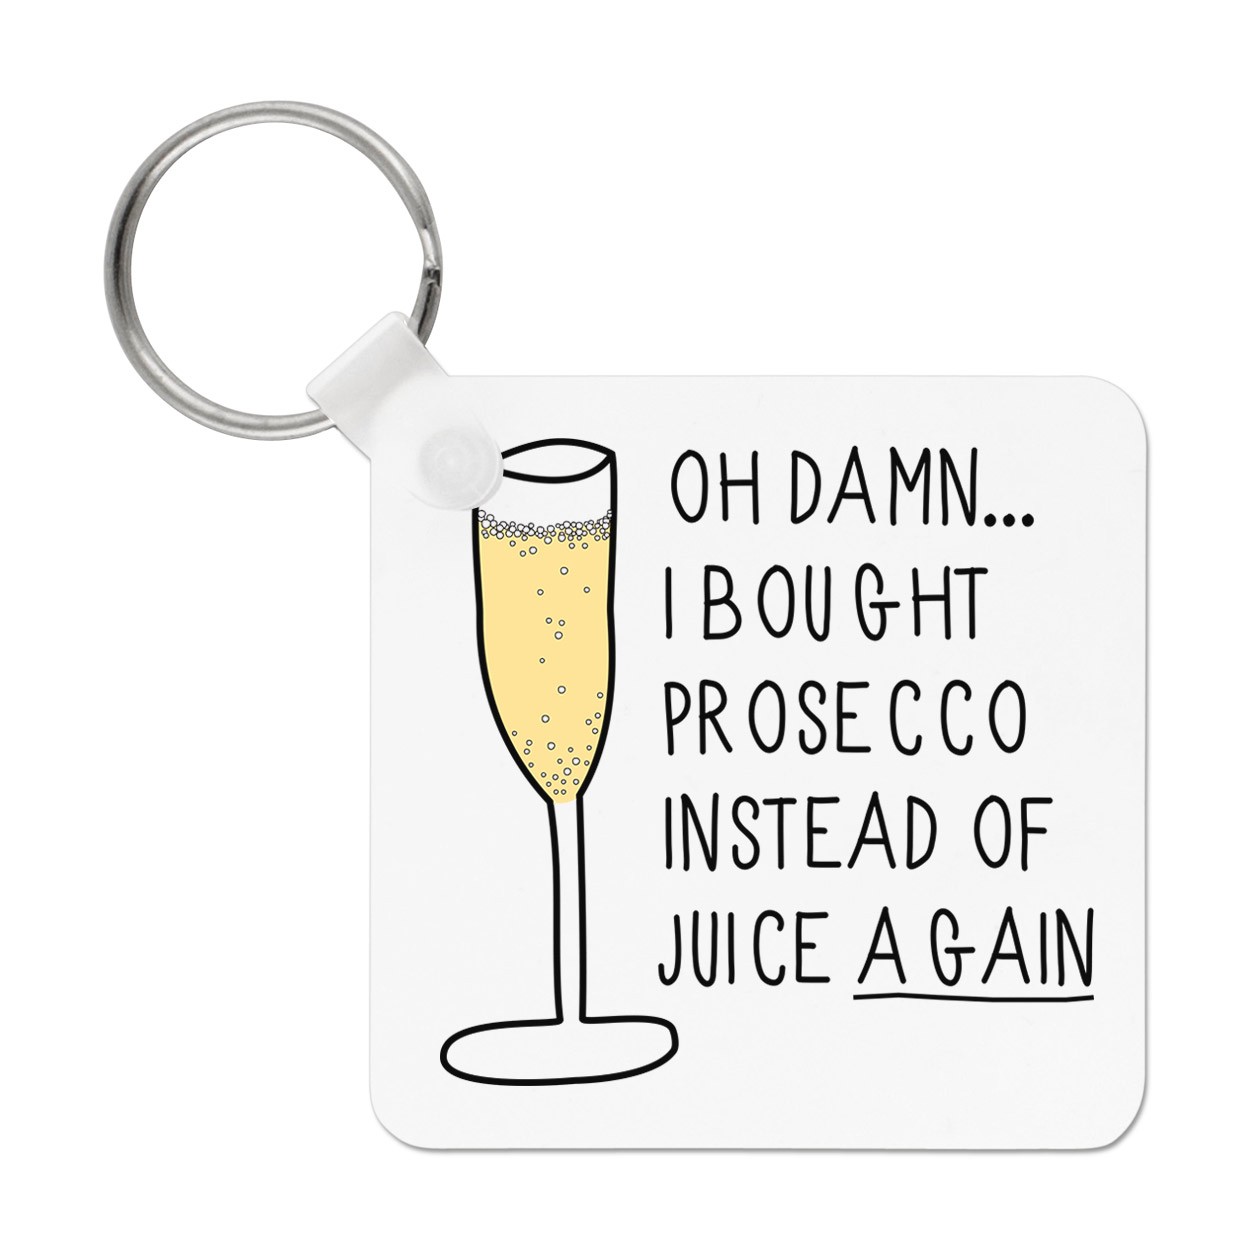 Oh Damn I Bought Prosecco Instead Of Juice Again Keyring Key Chain